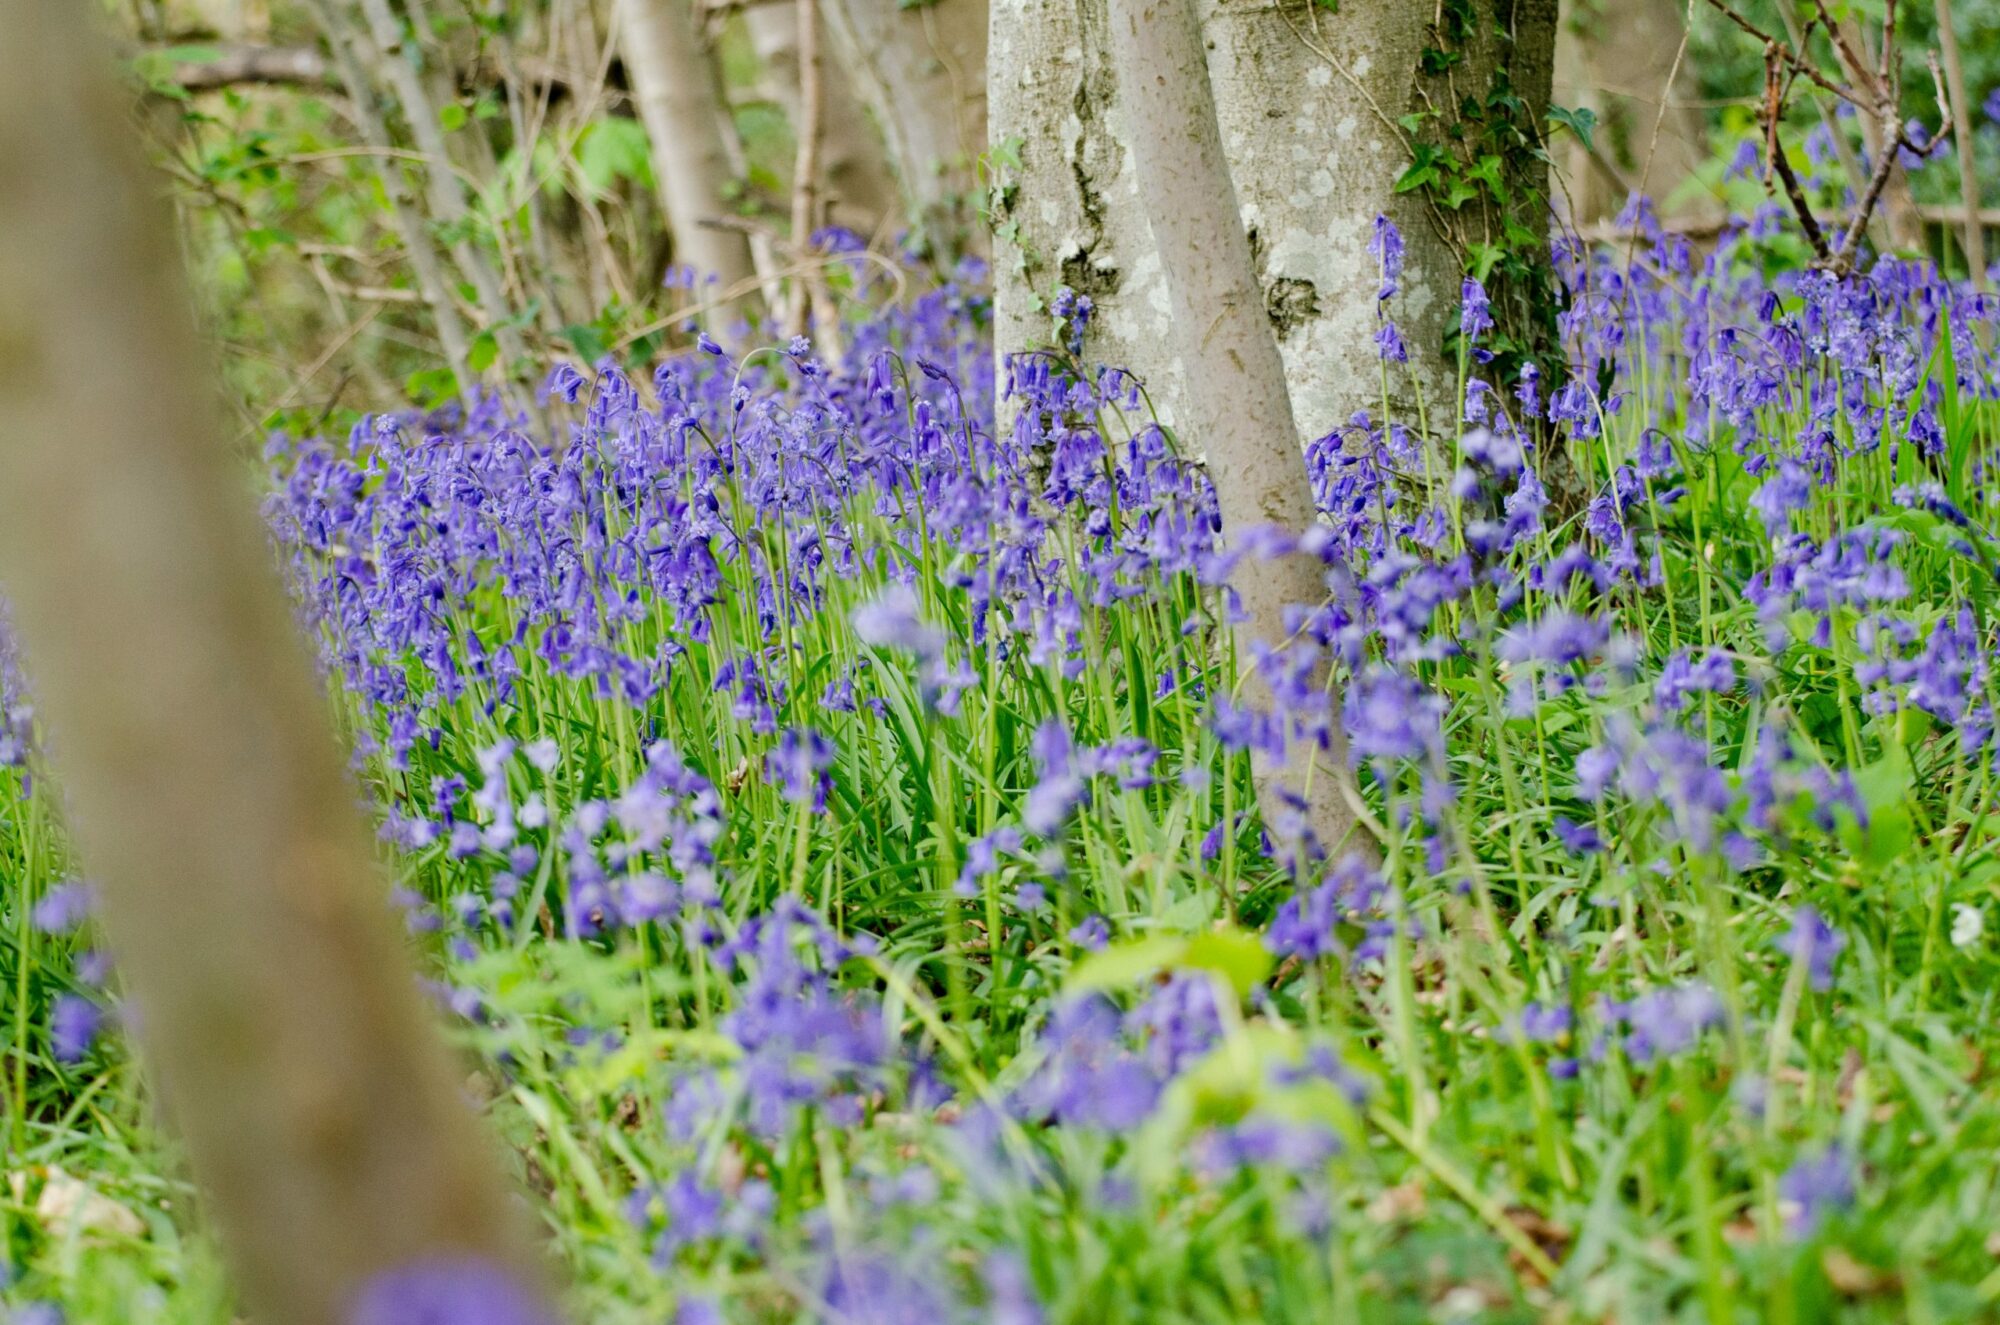 Image name Bluebells Josh Raper Conservation Media 5 scaled 1 the 20 image from the post Walking, Wellbeing and Wildlife in Yorkshire.com.